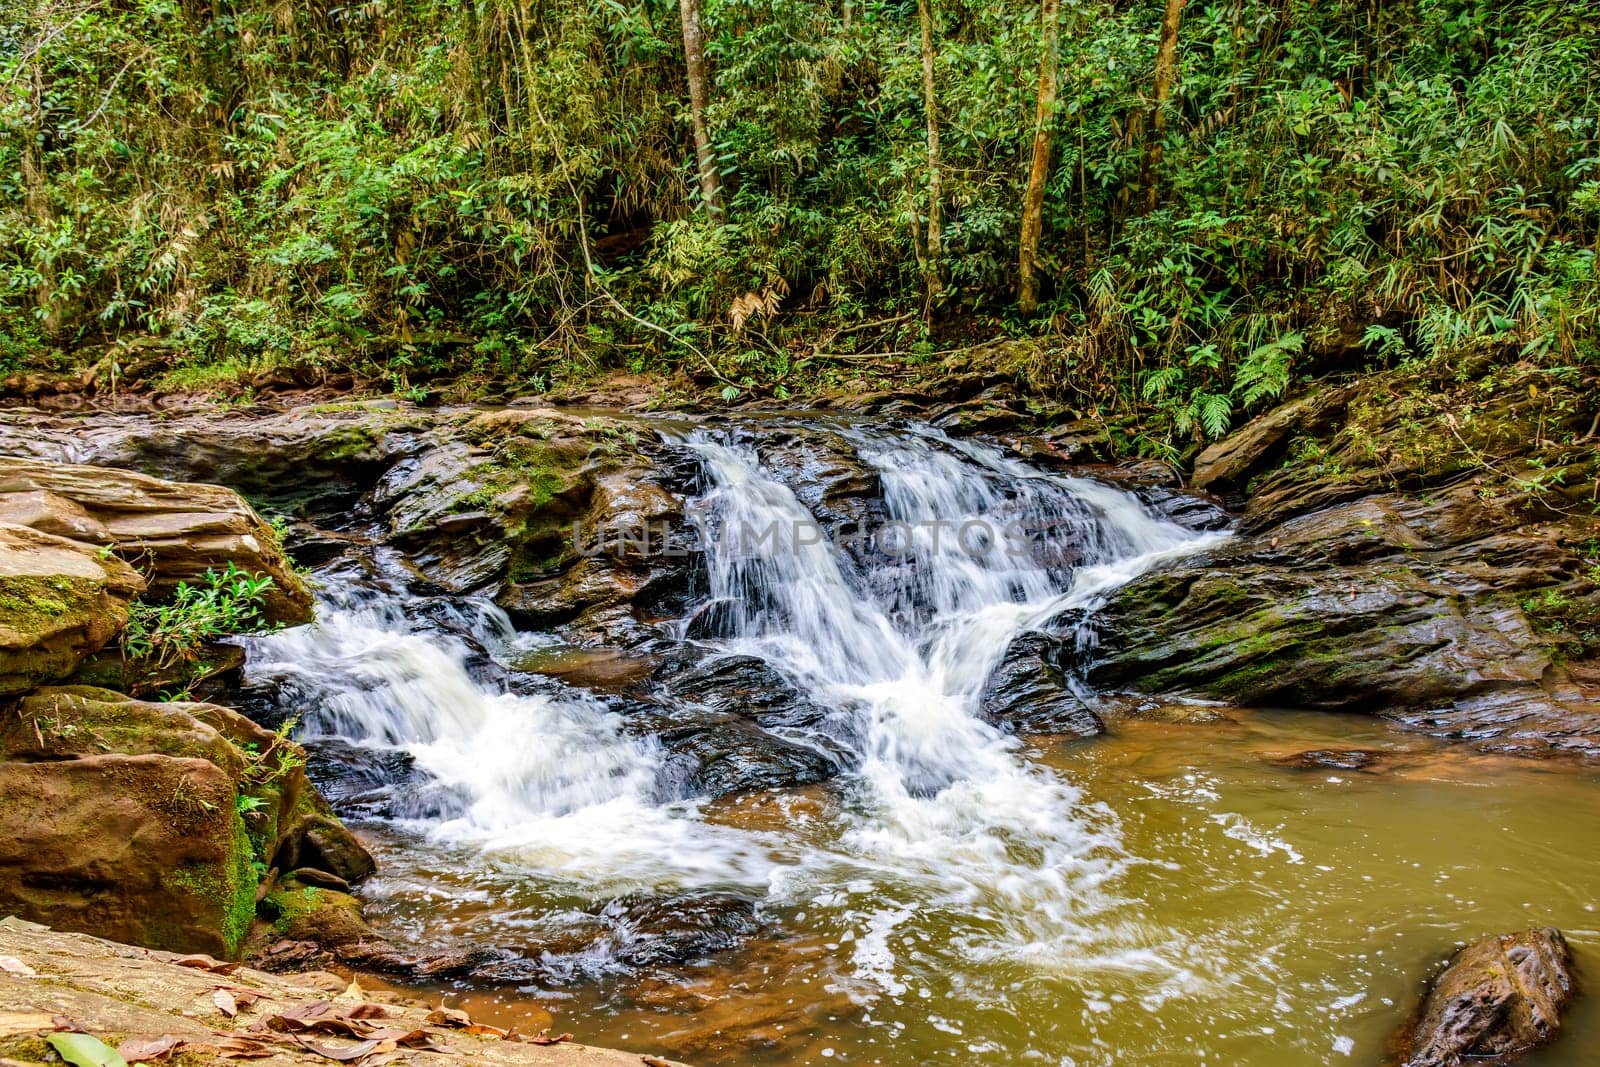 River inside forest in Minas Gerais state, Brazil